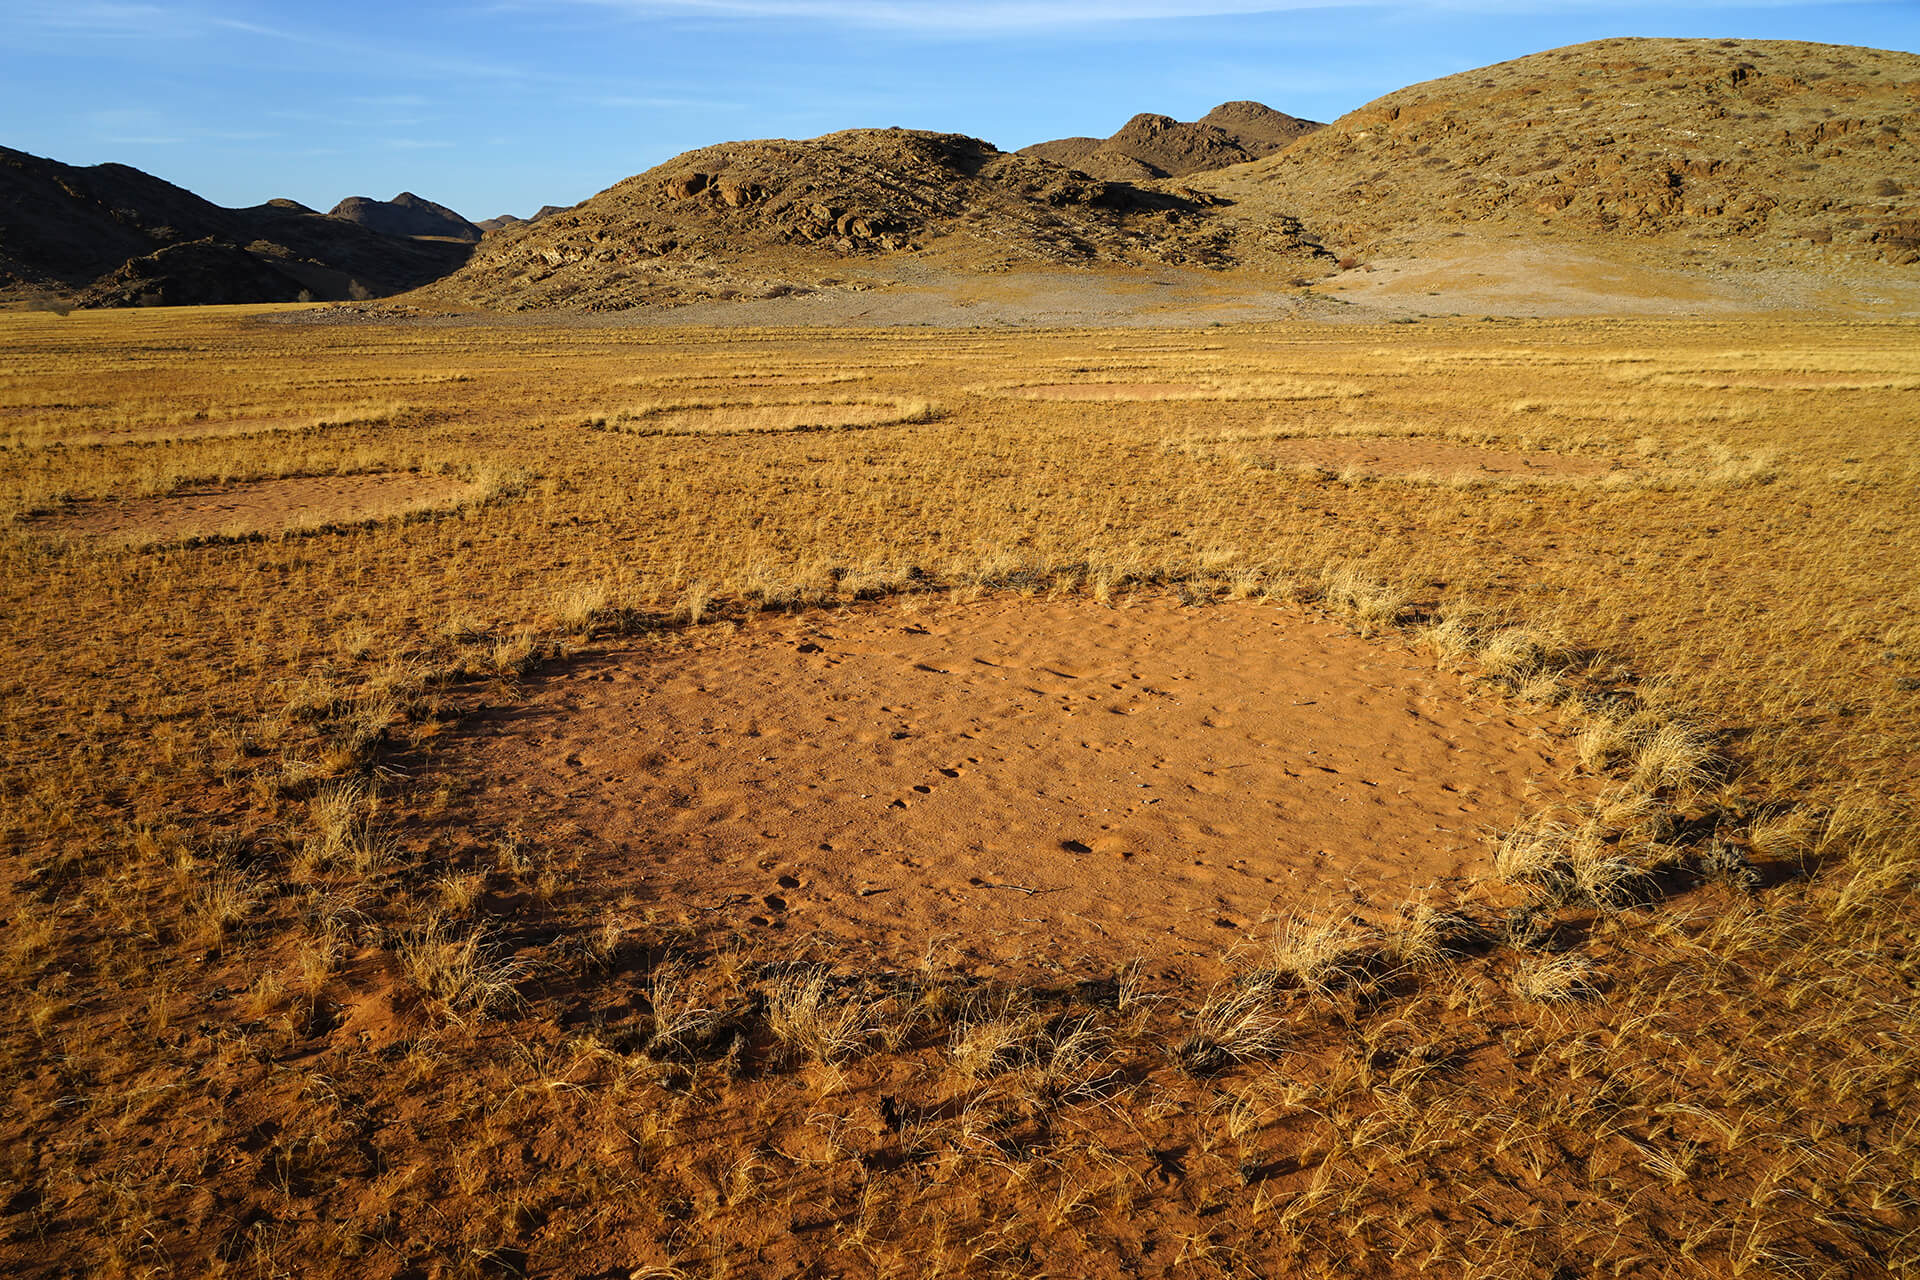 Fairy Circles in Namibia - All Facts about the Natural Phenomenon